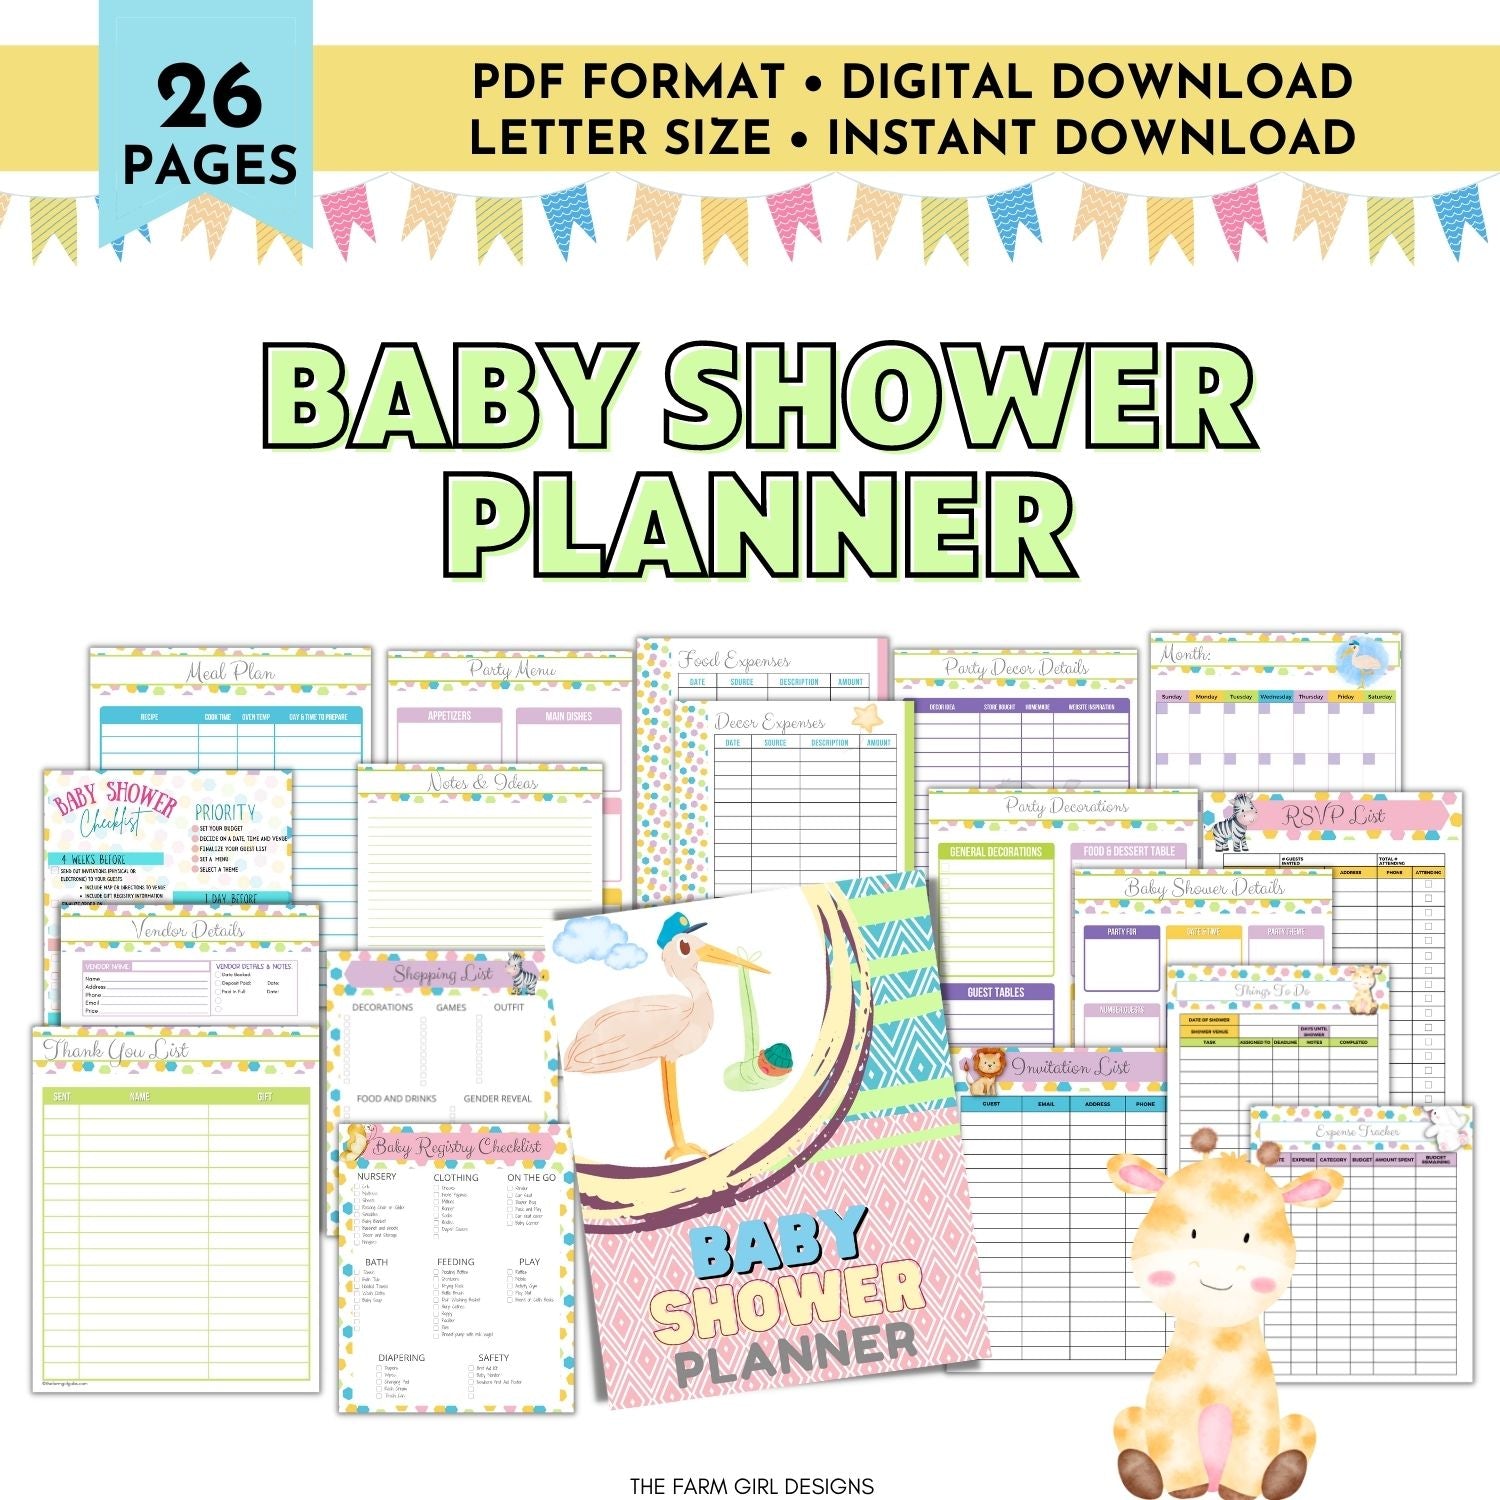 Baby Shower Checklist: How to Plan a Great Shower